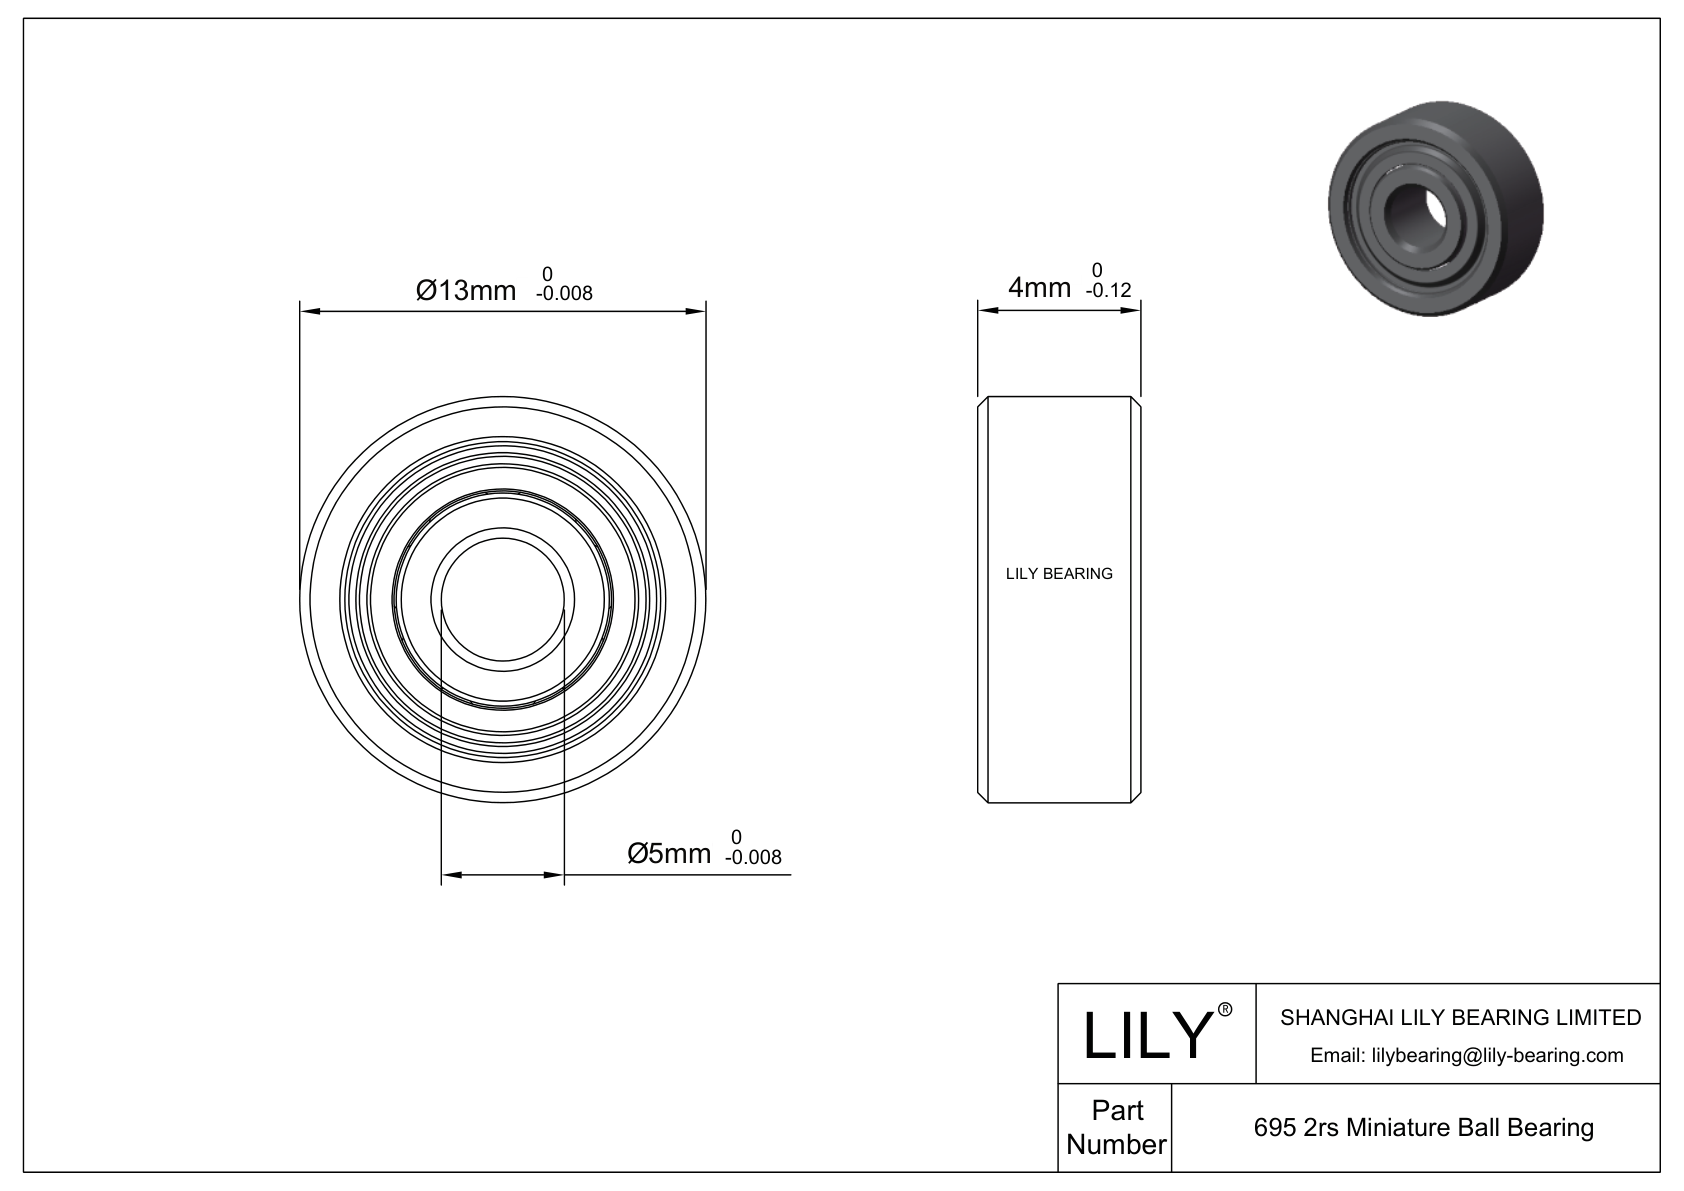 LILY-BS69516-6 POM Coated Bearing cad drawing